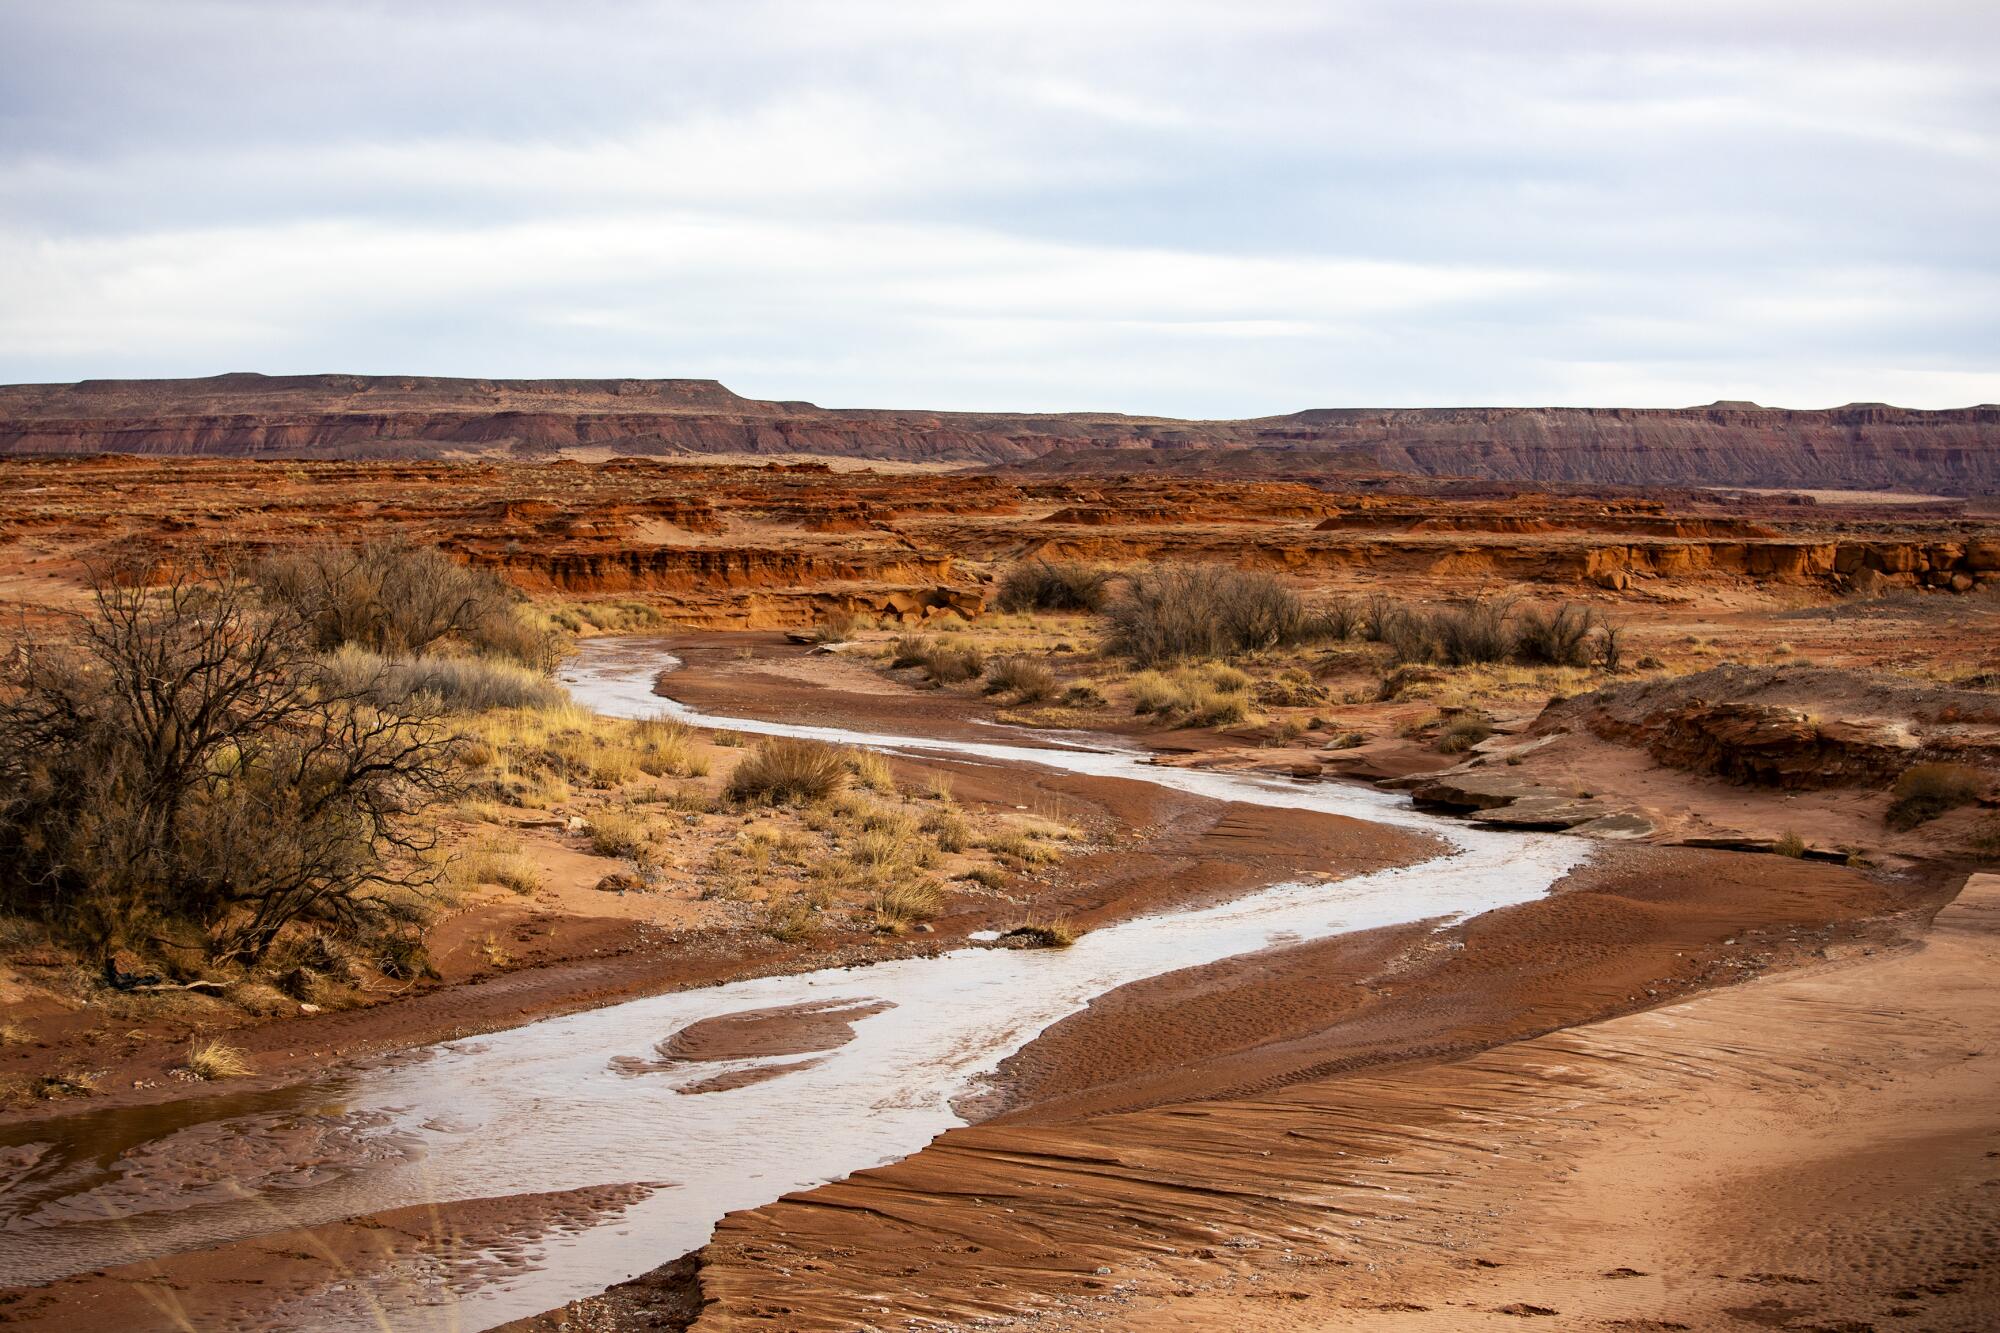 A stream winds trough a desert landscape as mesas rise in the background.